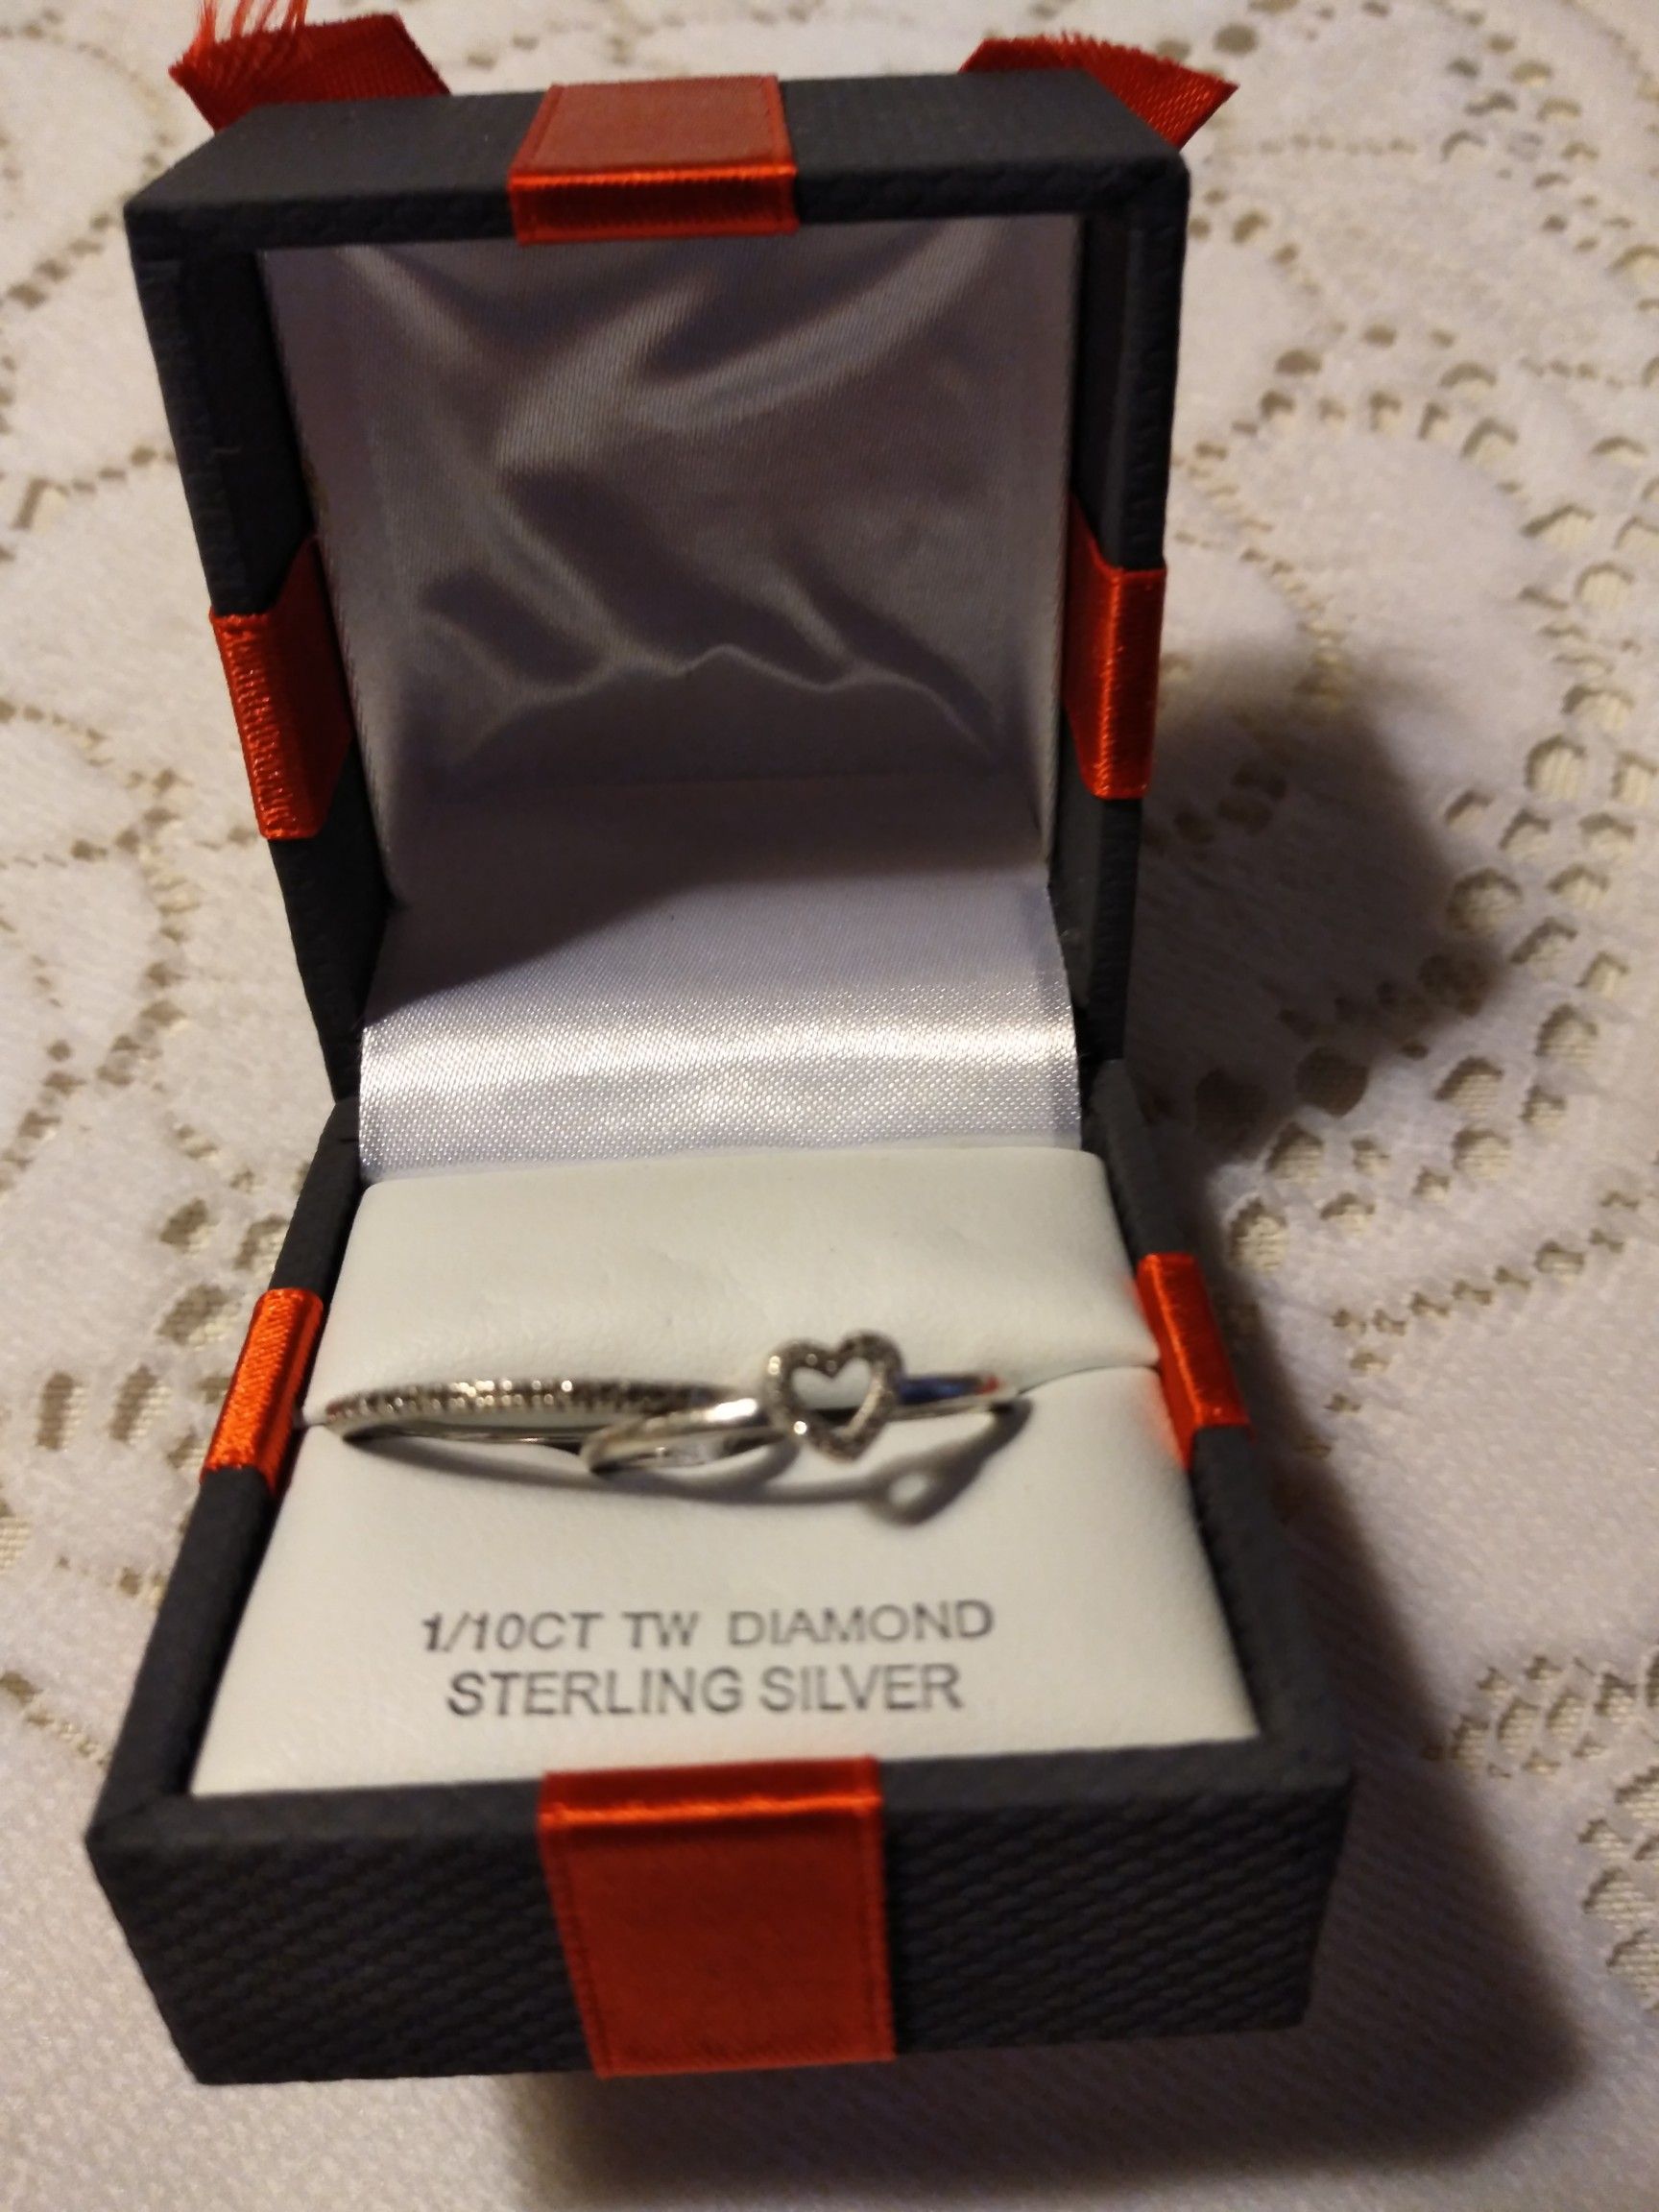 Sterling silver 1/10 cttw diamond ring 2 PC set Sz 7 No issues. Pd. $125.00 Asking $50.00